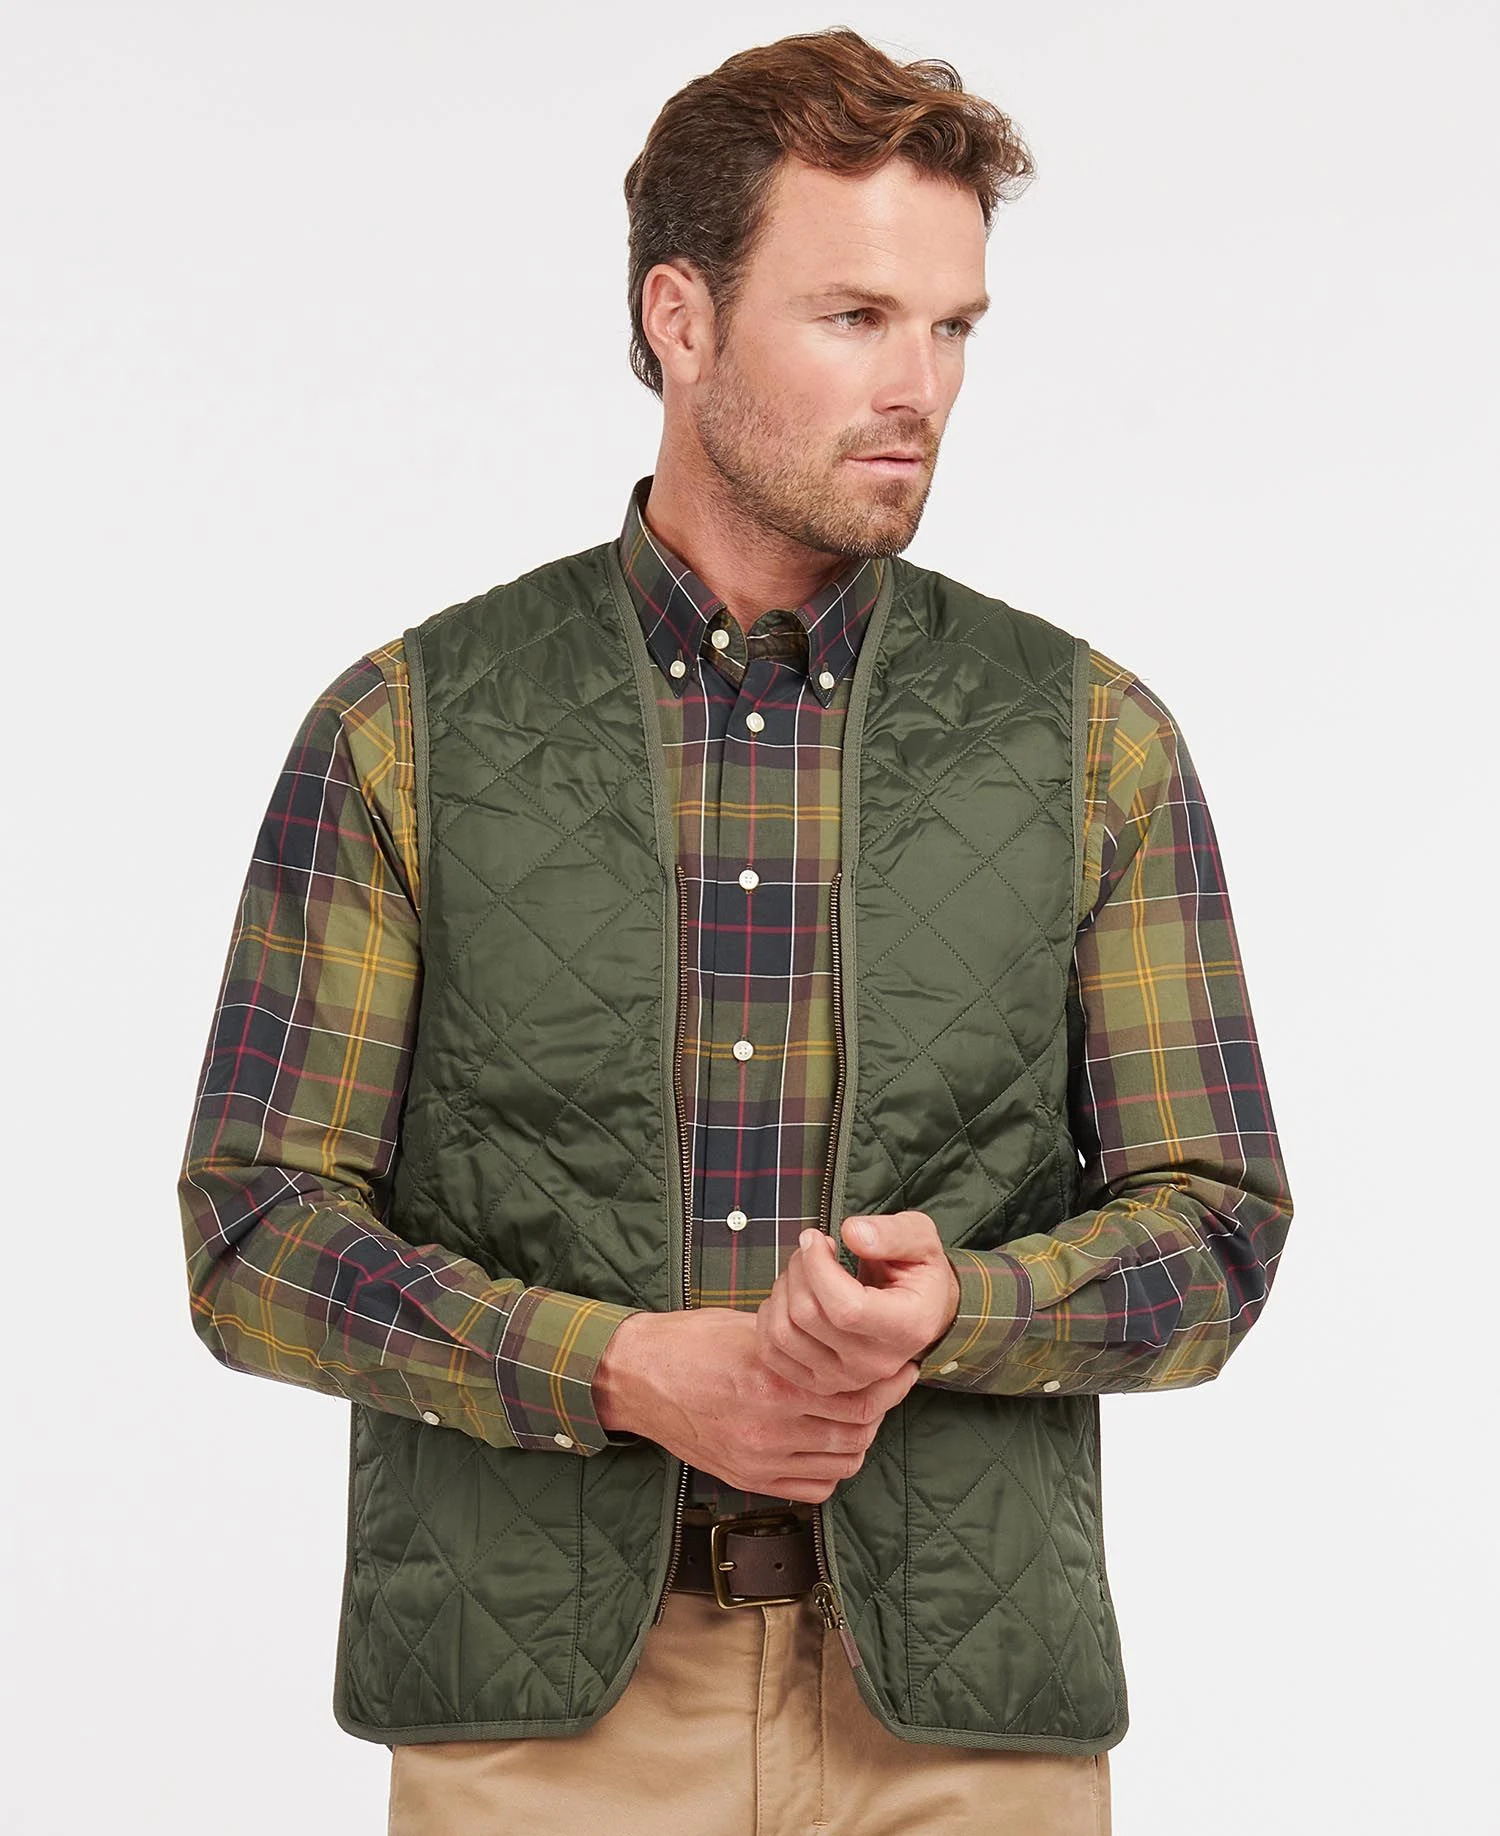 activering leveren kunst A look at the Iconic Barbour Beaufort Jacket | Barbour